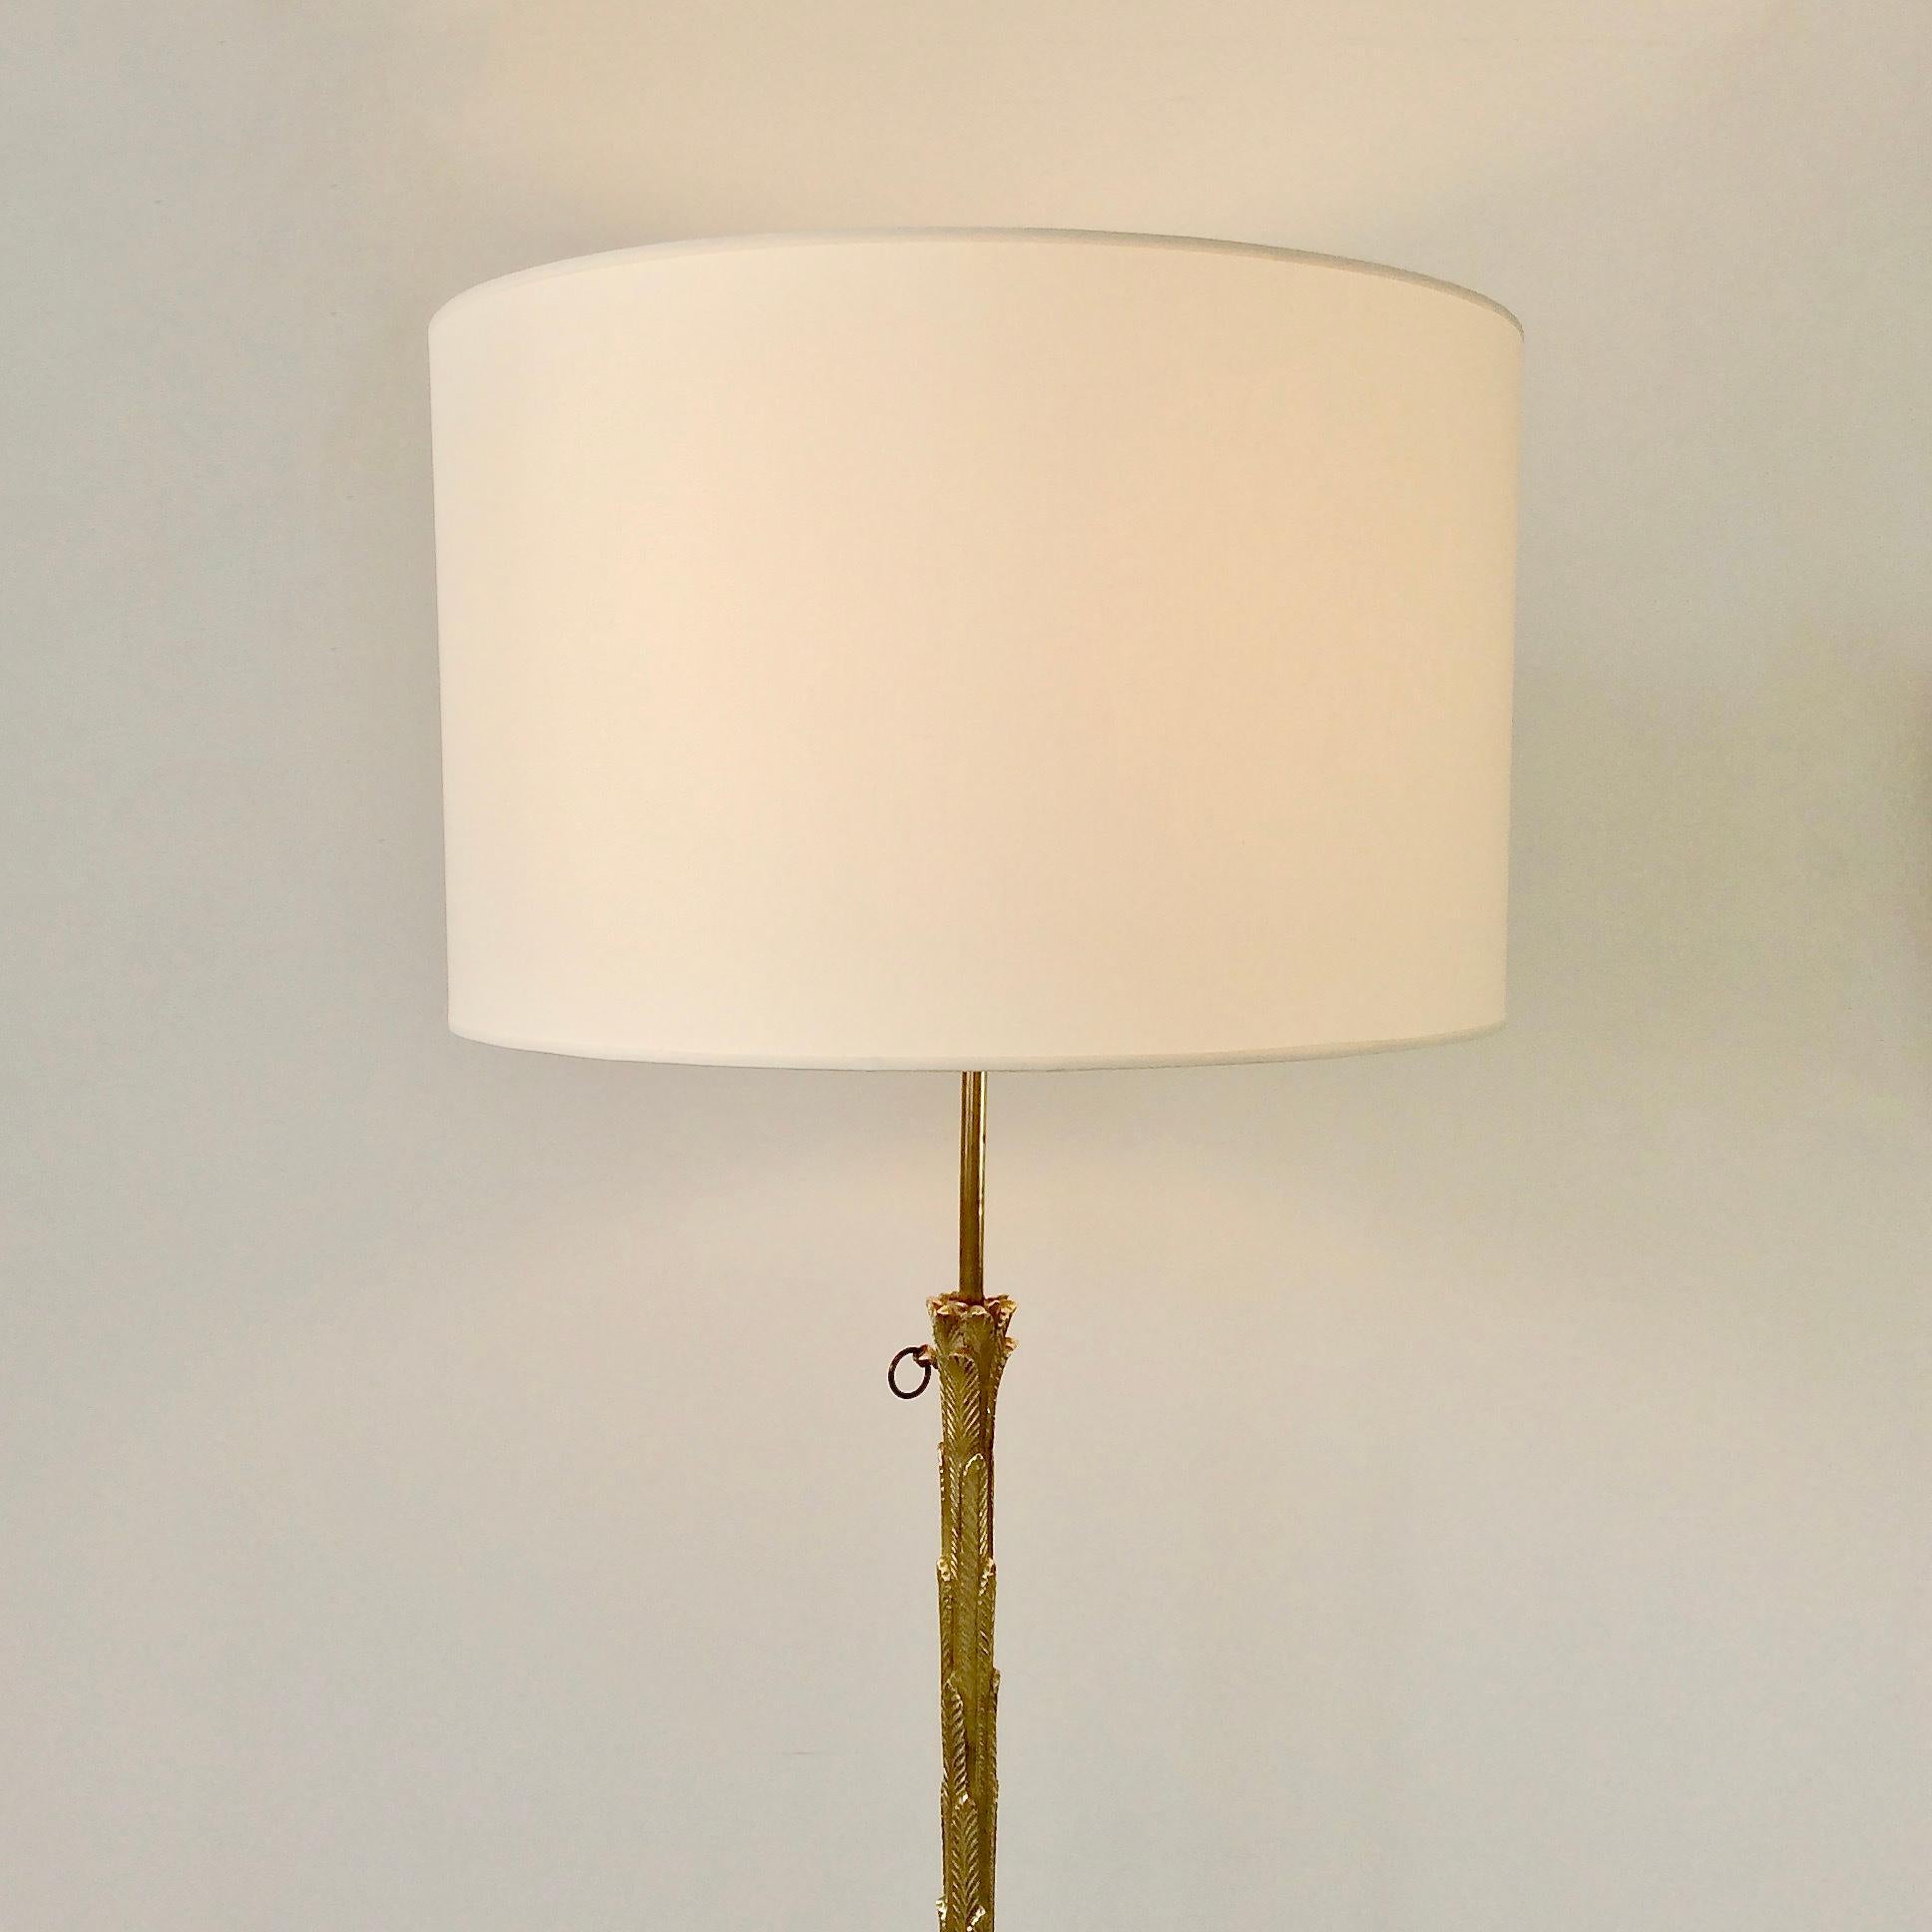 Maison Charles adjustable floor lamp, circa 1960, France.
Gilt bronze foliage decor, brass, new ivory fabric shade.
Adjustable height, rewired.
One E27 bulb of 60W.
Dimensions: 165 cm height, diameter of the shade: 47 cm.
Nice quality, in good